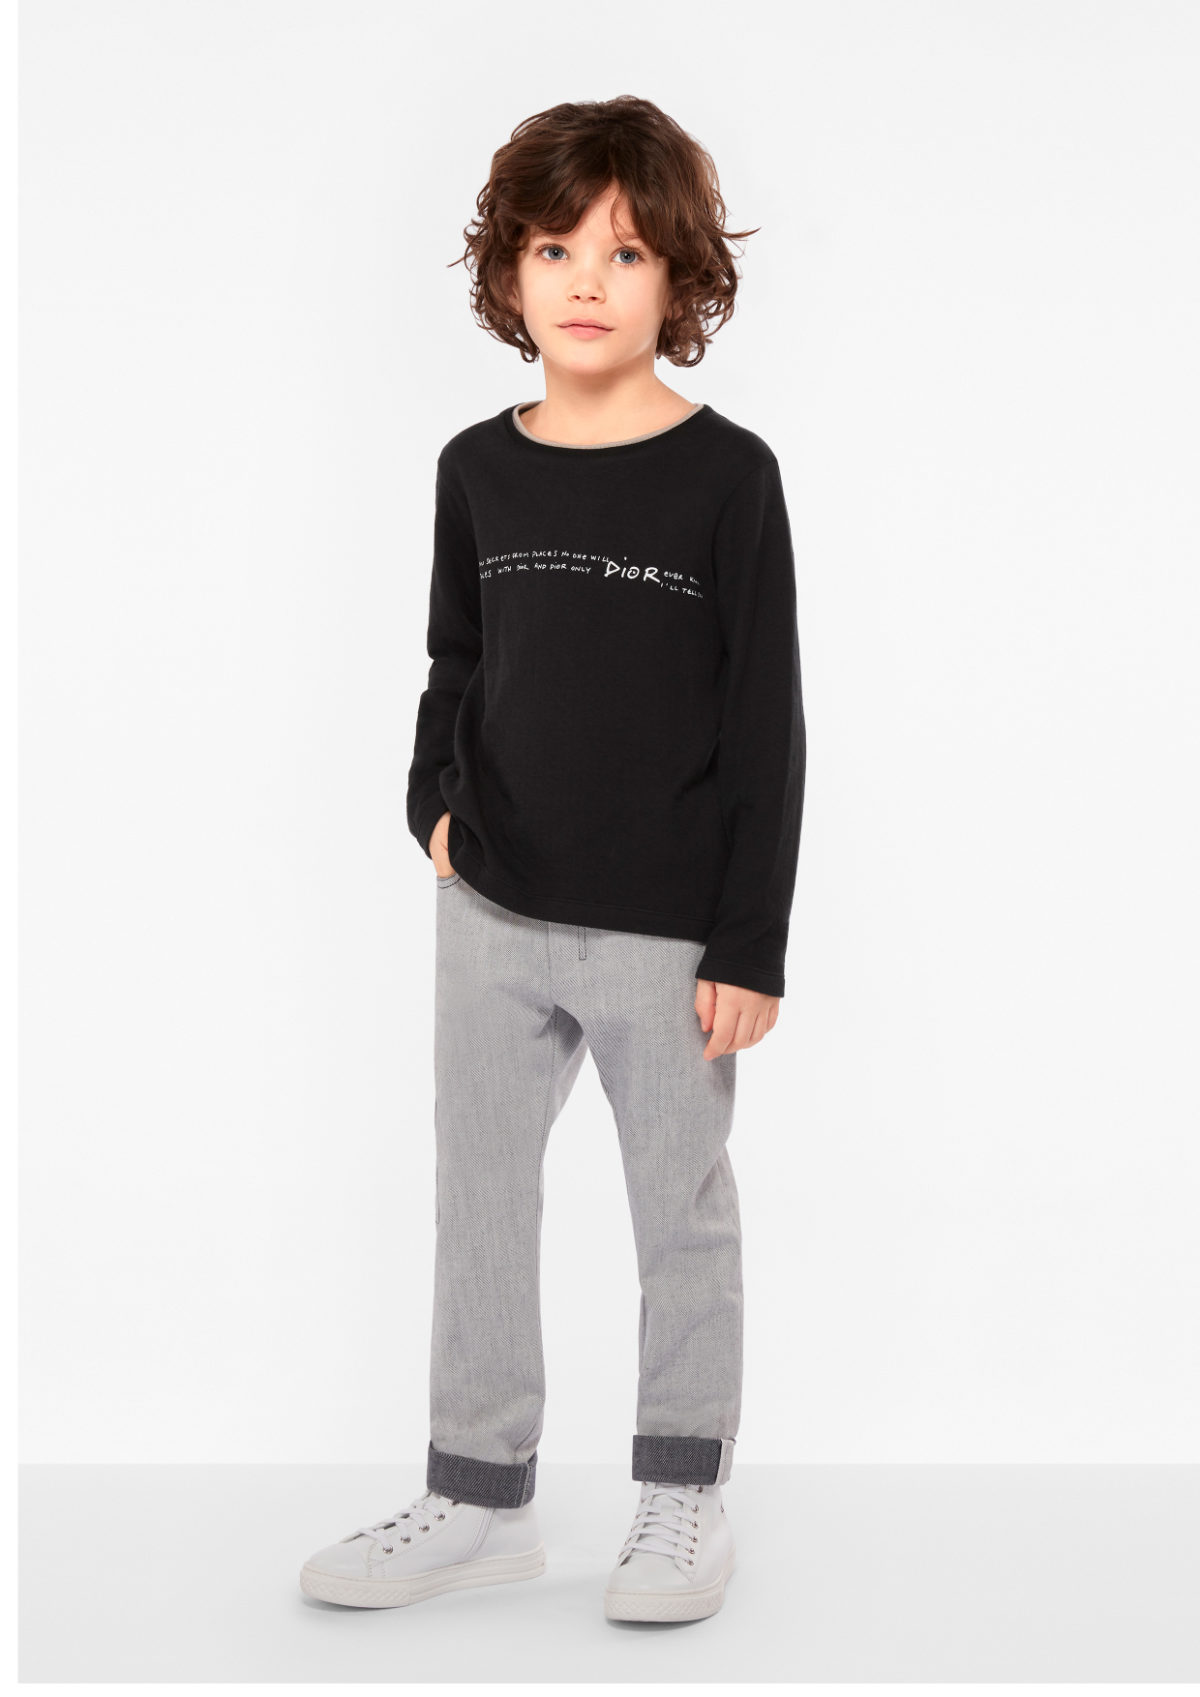 Dior Kids Ready-To-Wear: Boys Autumn-Winter 2020-21 Collection ...